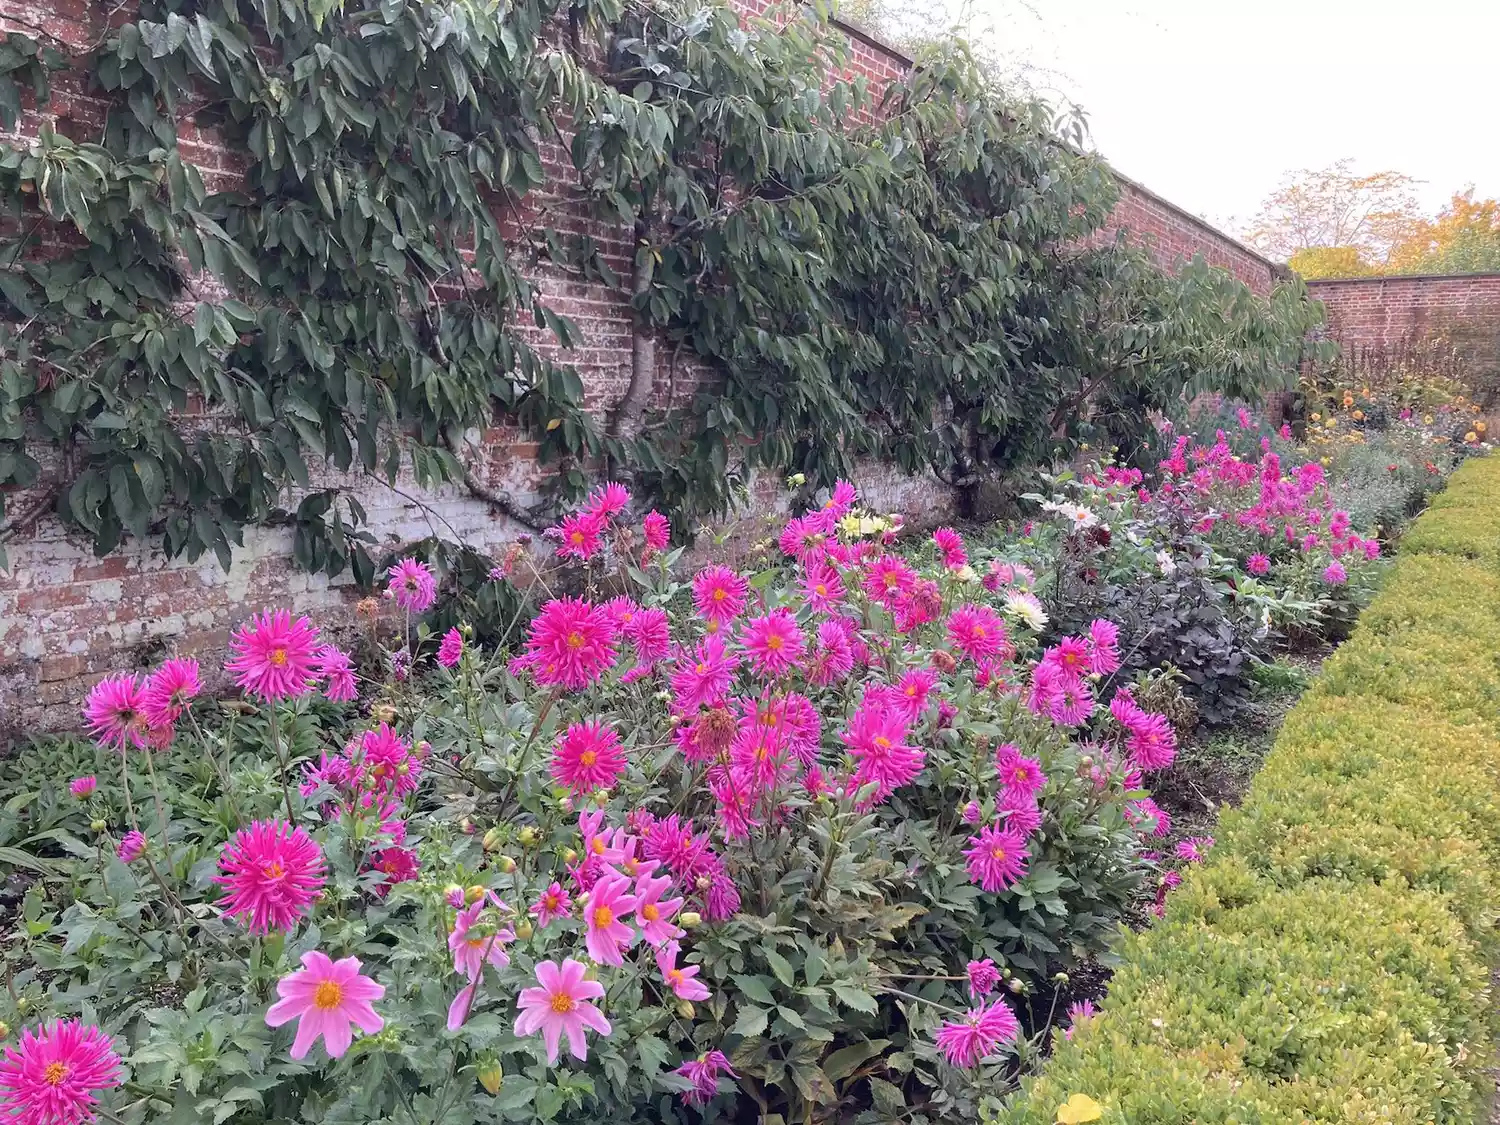 Bright pink dahlias in herbaceous border in front of espaliered cherry trees on a brick wall